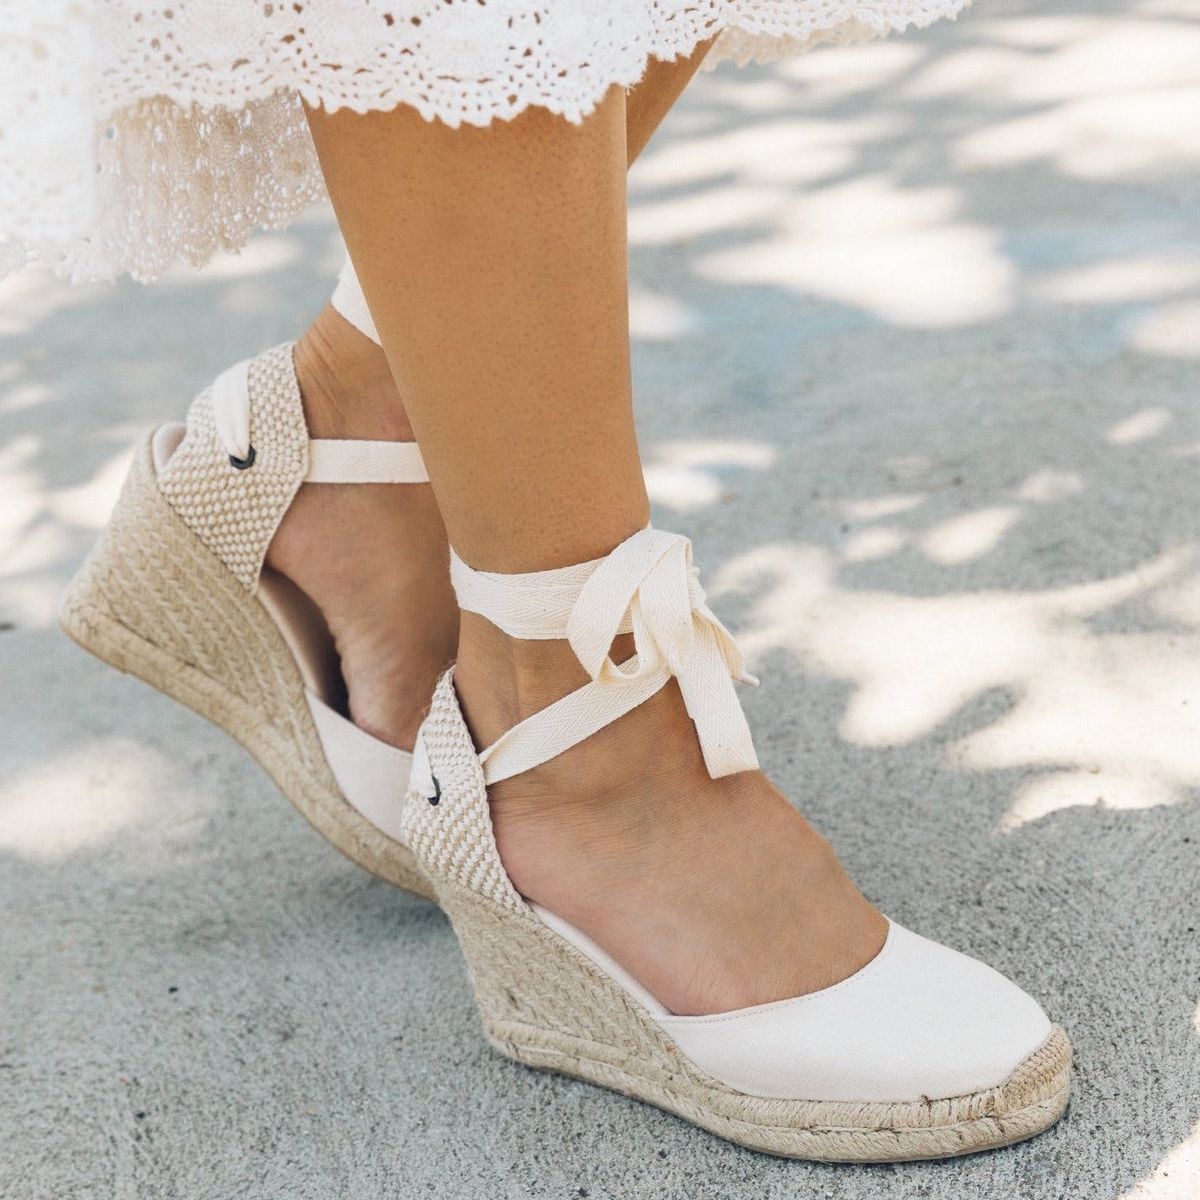 How to Spend Under $100 on Your Wedding Day Shoes